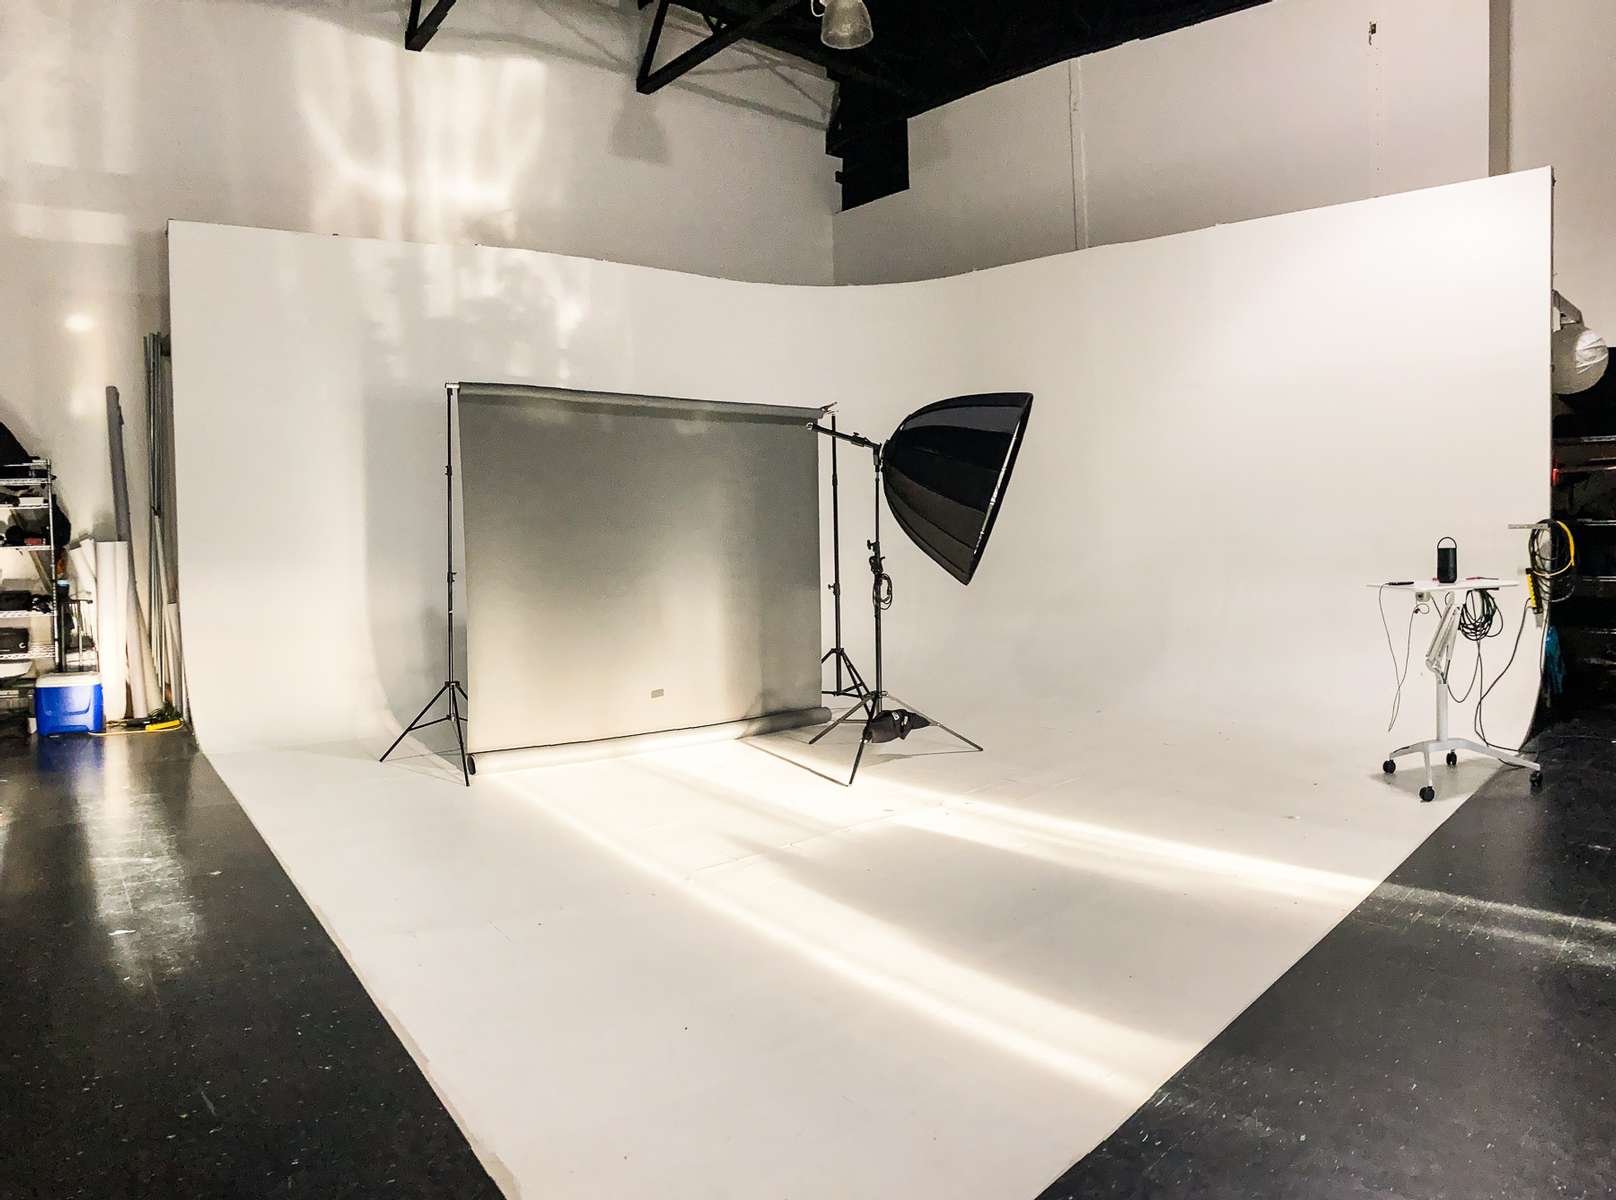 Behind the scenes during photo shoots at JAM Creative's photography studio in Burlington, Vermont.